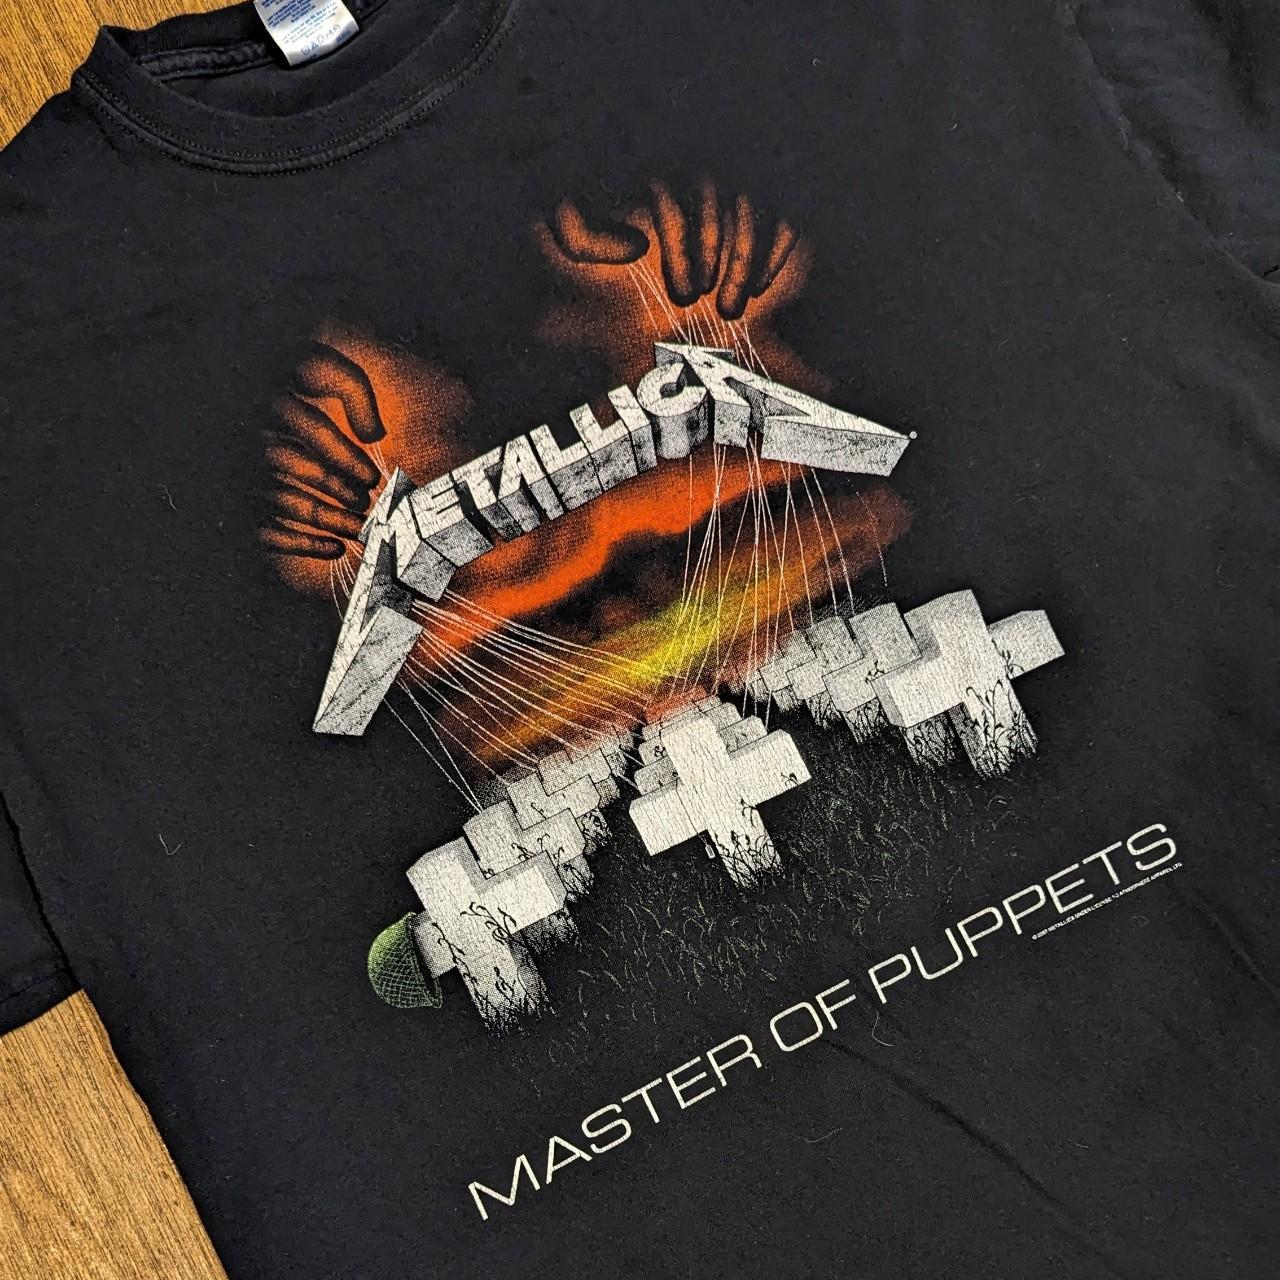 Official Metallica Master Of Puppets T-shirt,Sweater, Hoodie, And